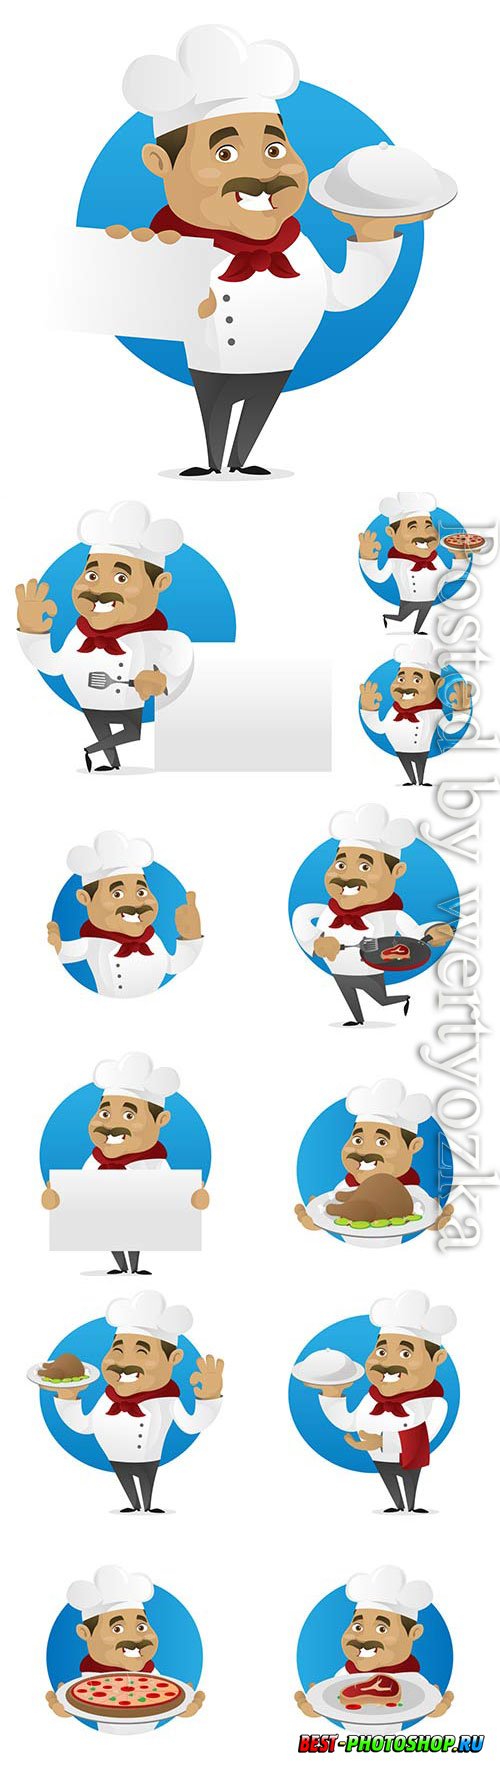 Cartoon chef with a dish in his hands in vector